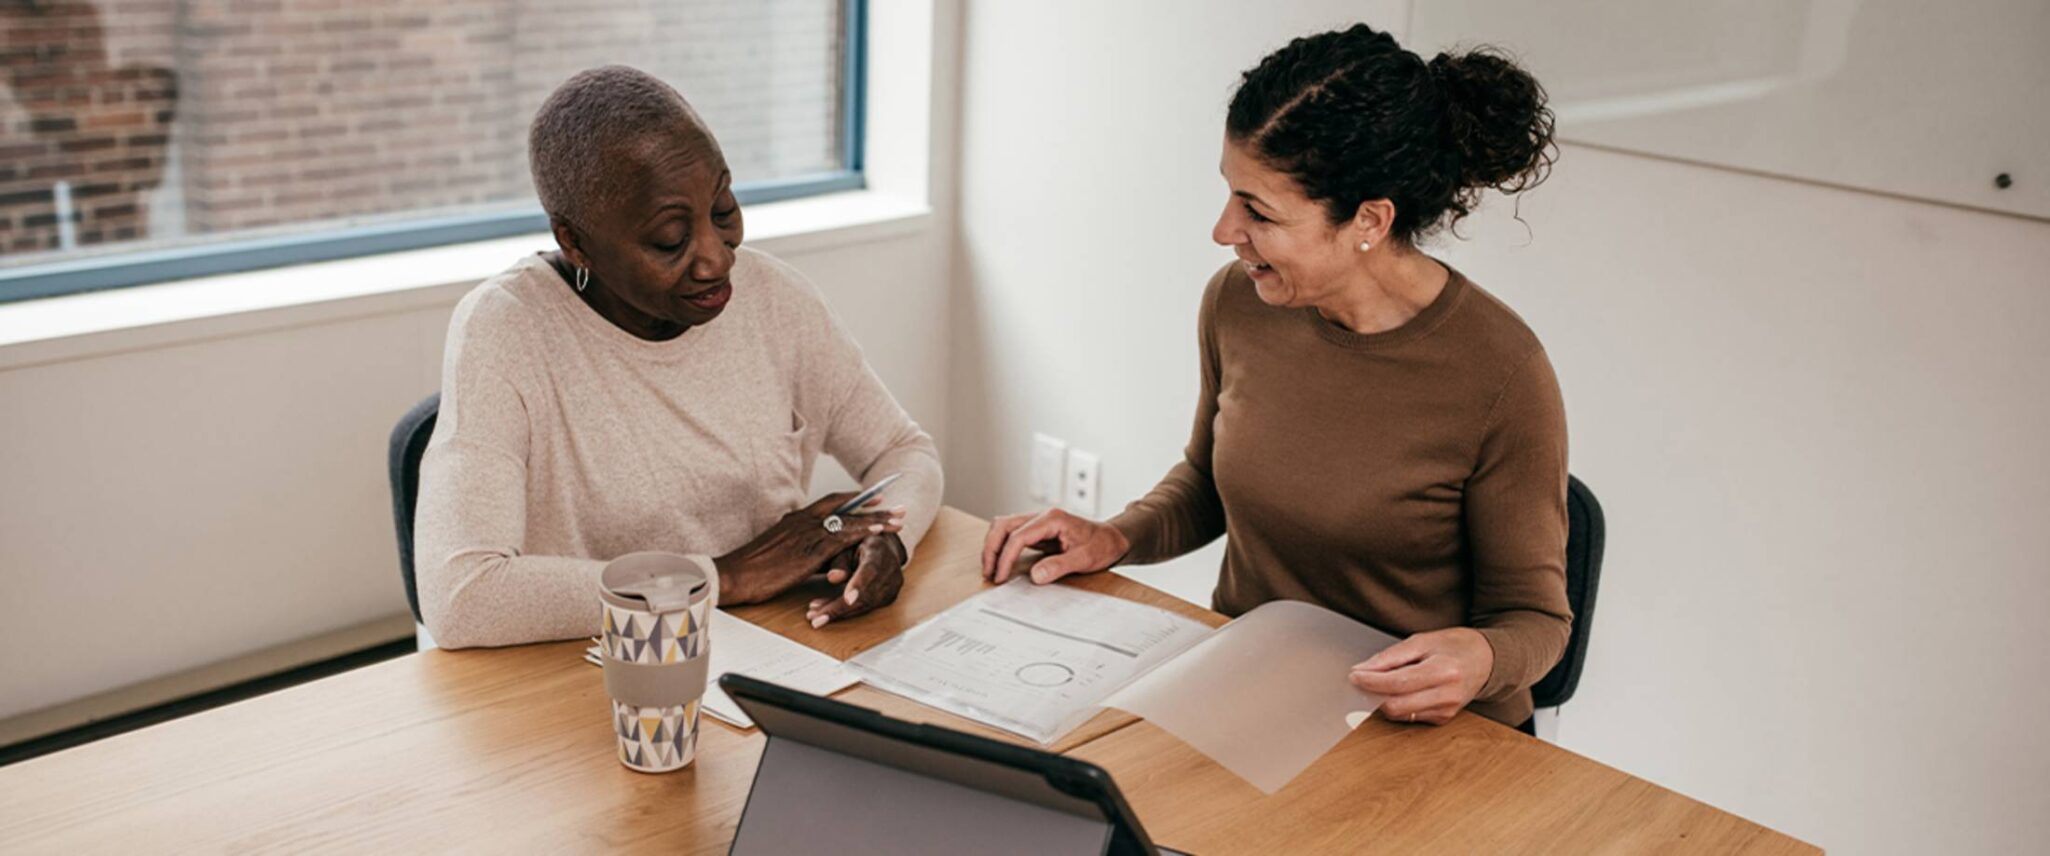 a middle aged woman helps an elderly woman with paperwork at a table